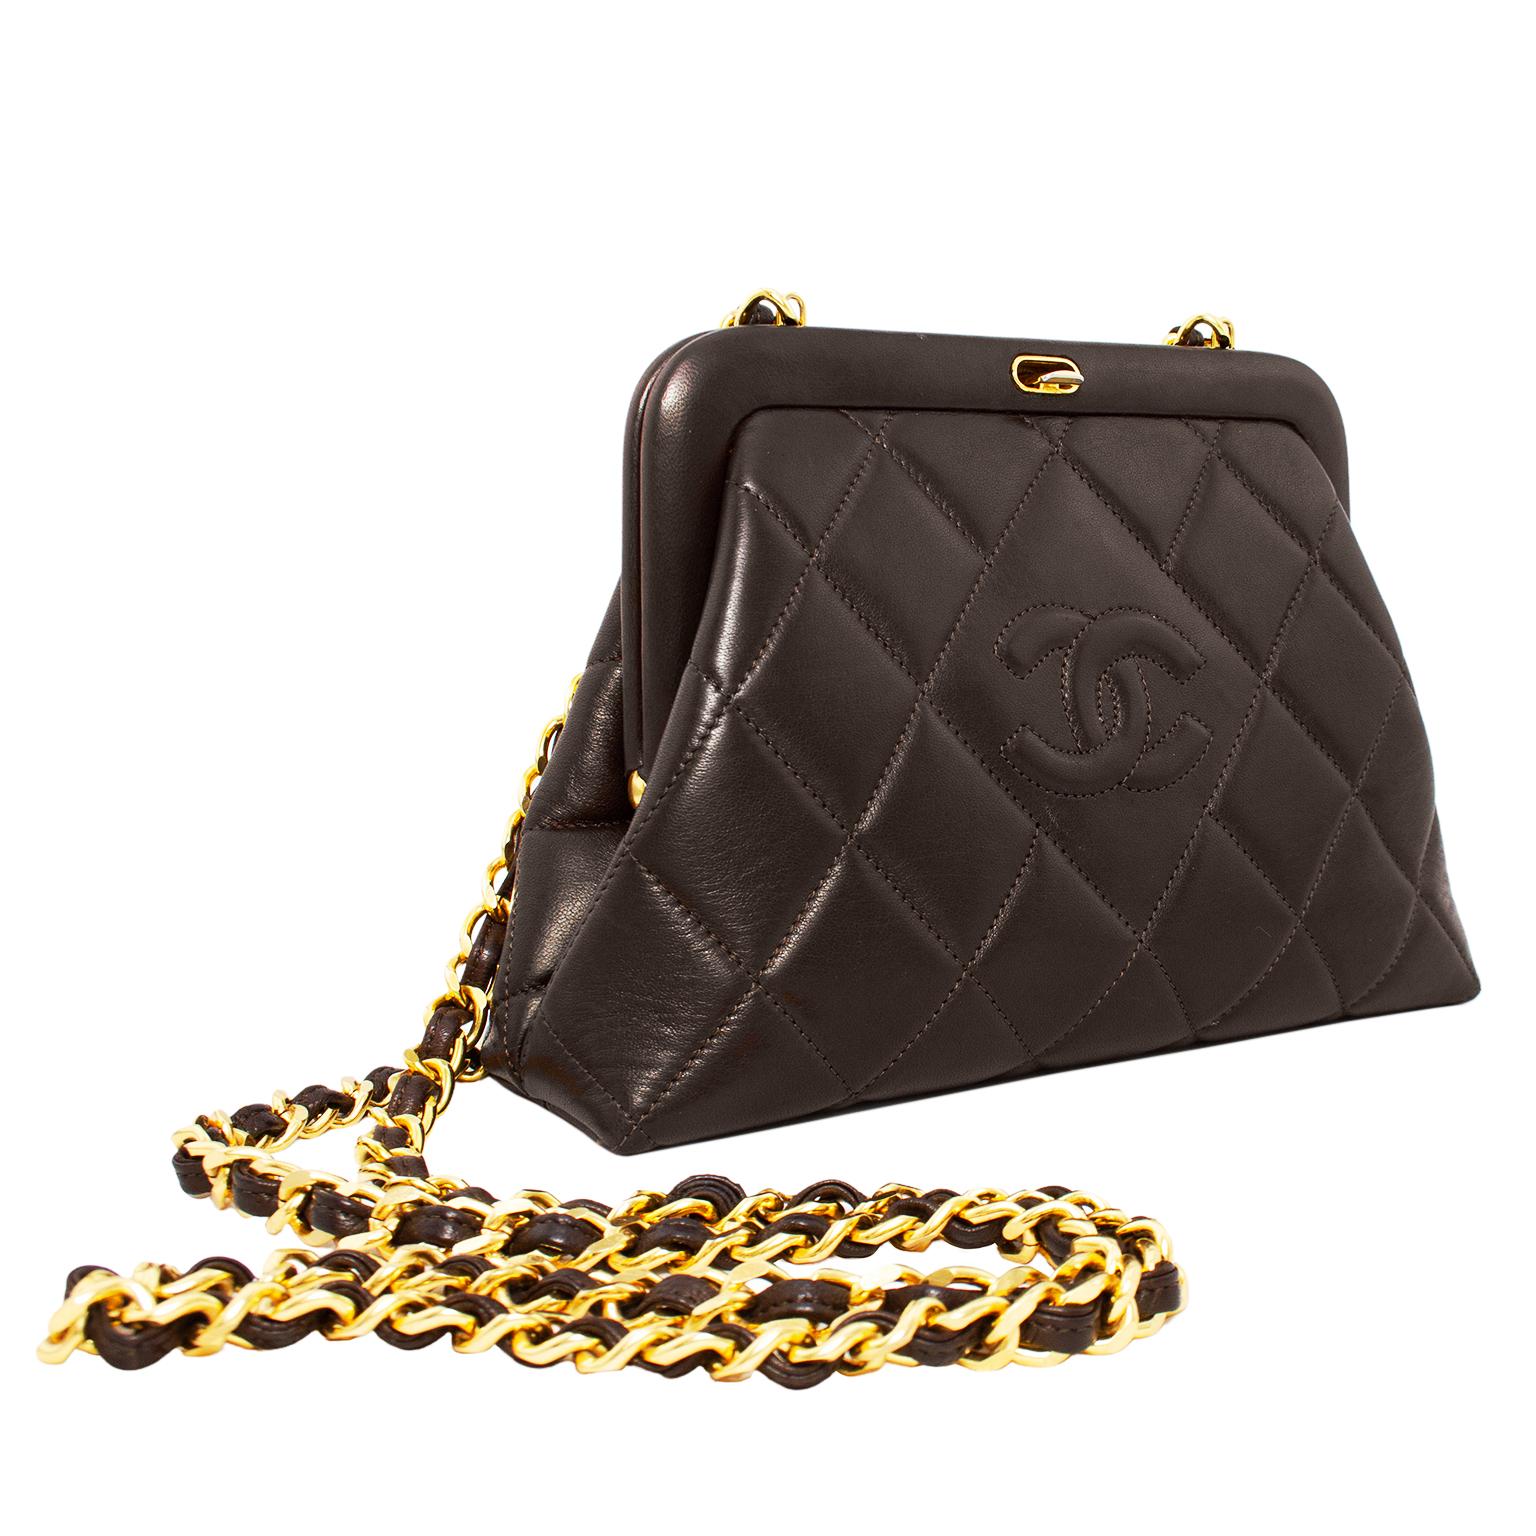 Incredibly stunning Chanel frame style bag from the 1980s. Deep chocolate brown quilted supple leather with contrasting warm gold hardware. Push down on the snap closure tab to open the frame and reveal the iconic maroon leather interior that all